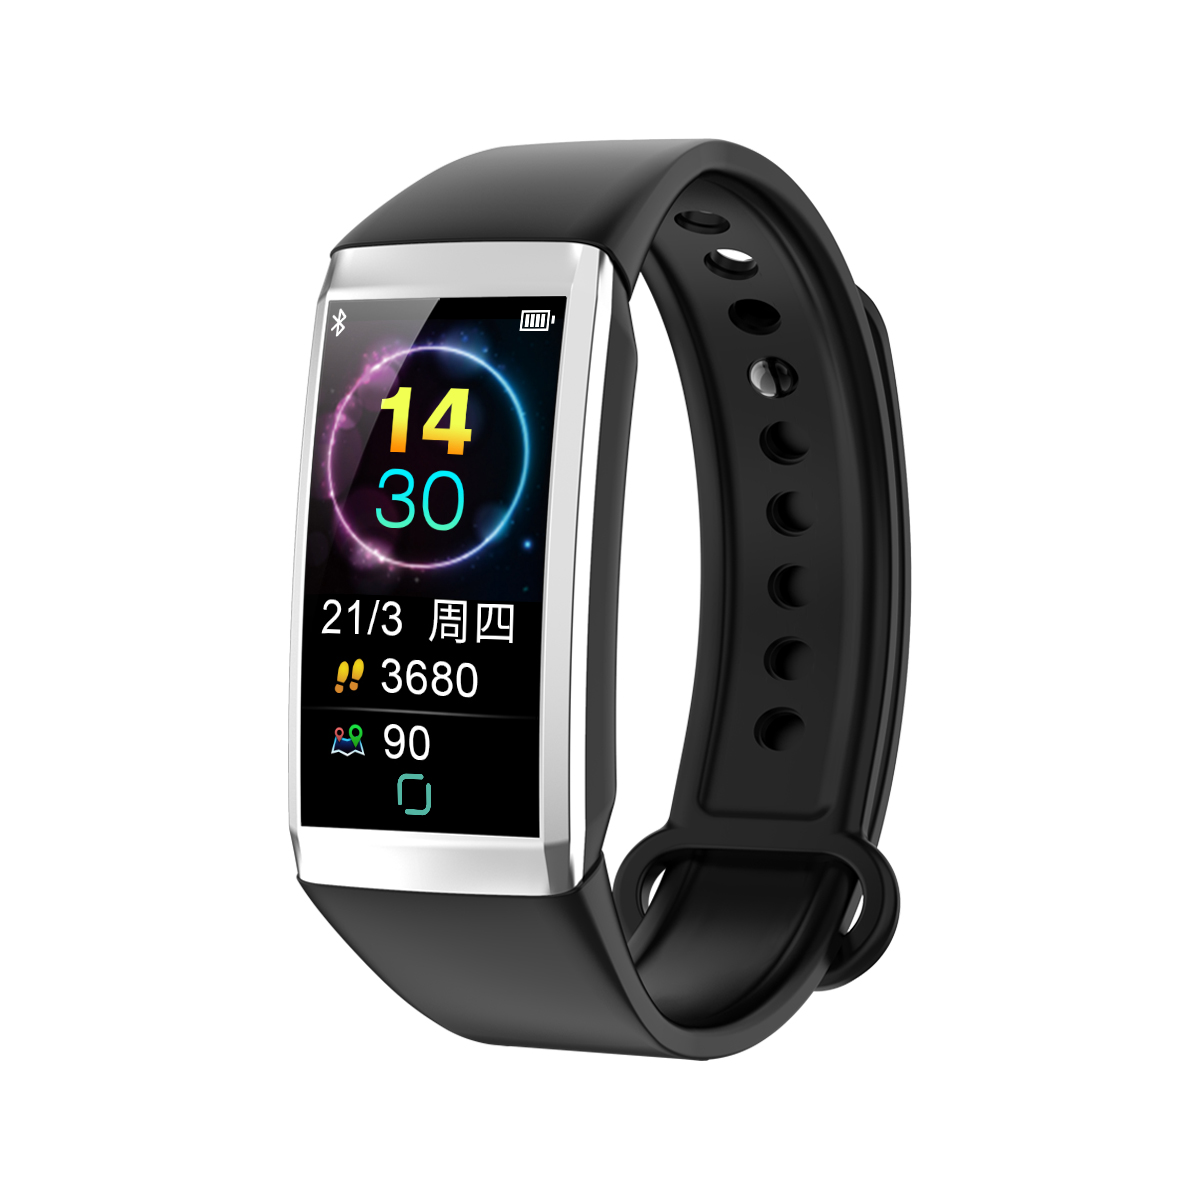 Td19 Fashion IP67 Waterproof Real Time Heart Rate Blood Pressure Spo2 Monitoring Smart Watch with Anti-lost 